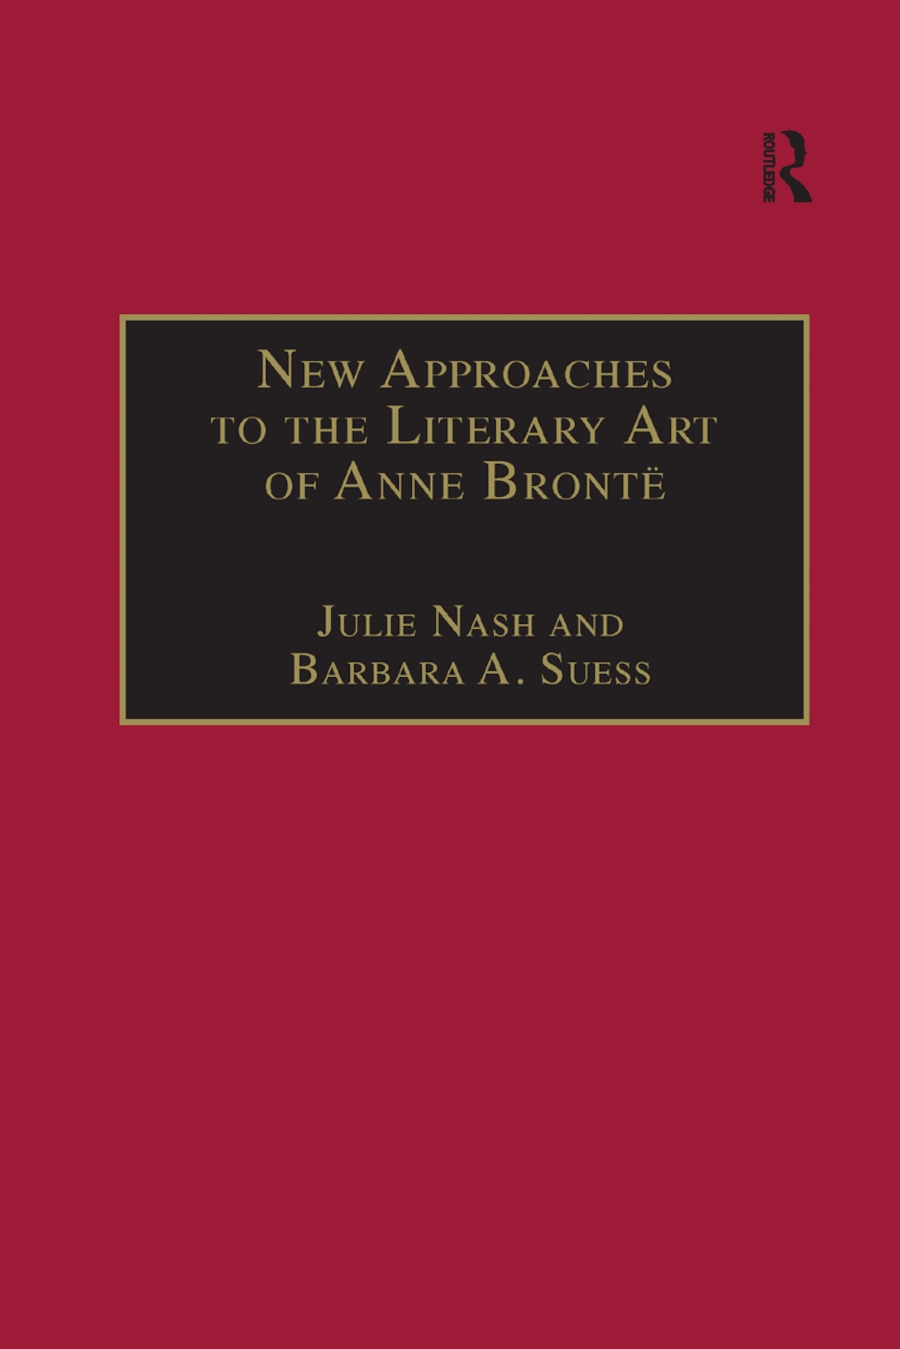 New Approaches to the Literary Art of Anne Bronte